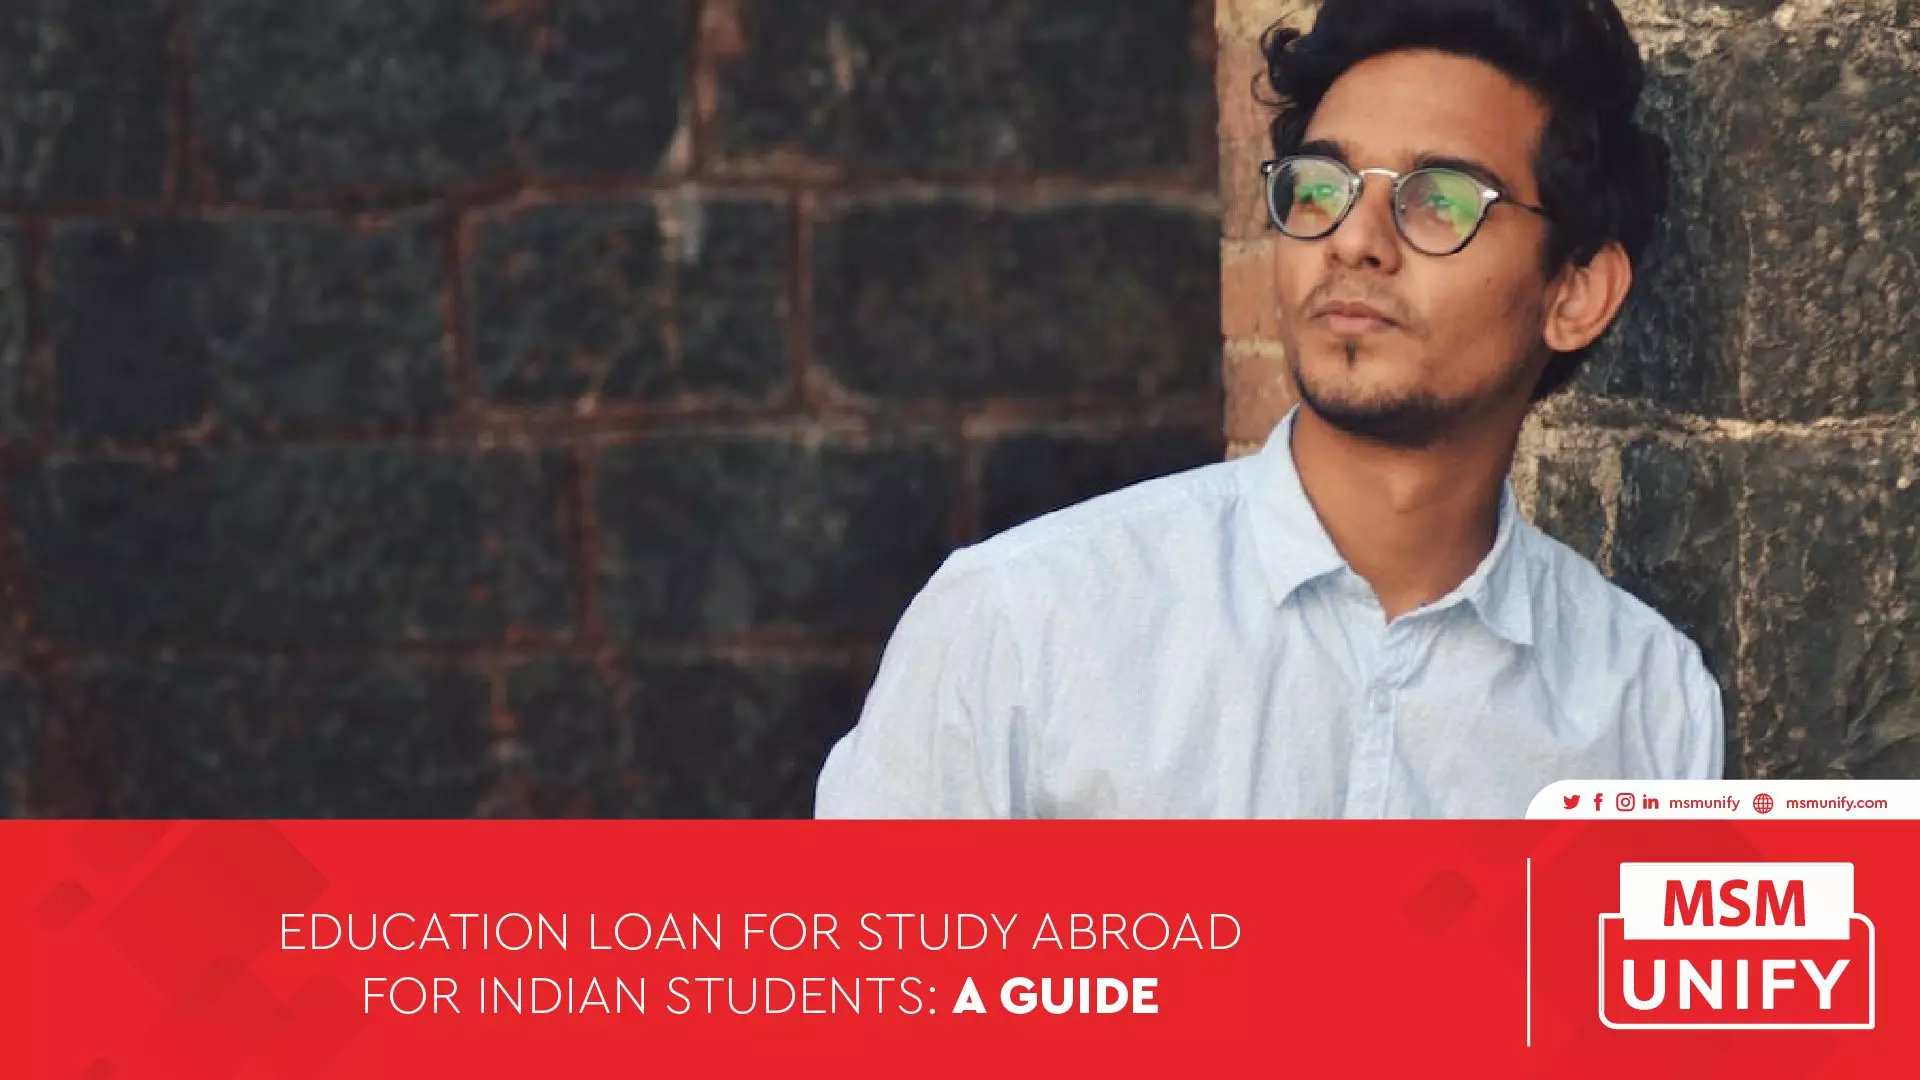 011623 MSM Unify Education Loan for Study Abroad for Indian Students A Guide 01